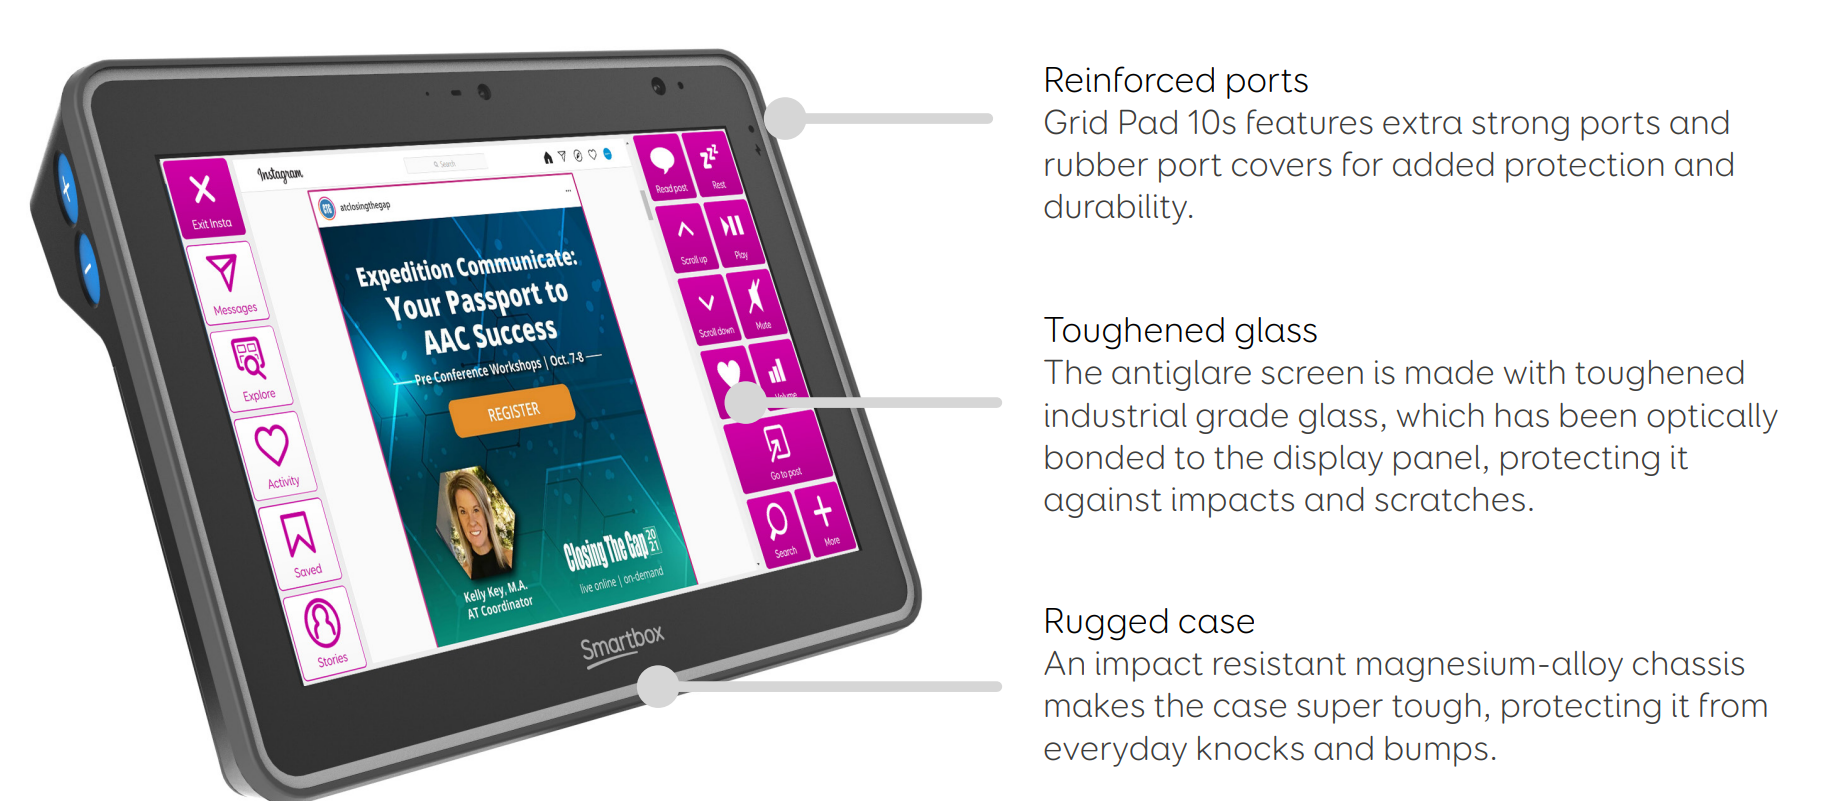 Reinfirced port for added protection and durability. Toughened Glass and Rugged Case